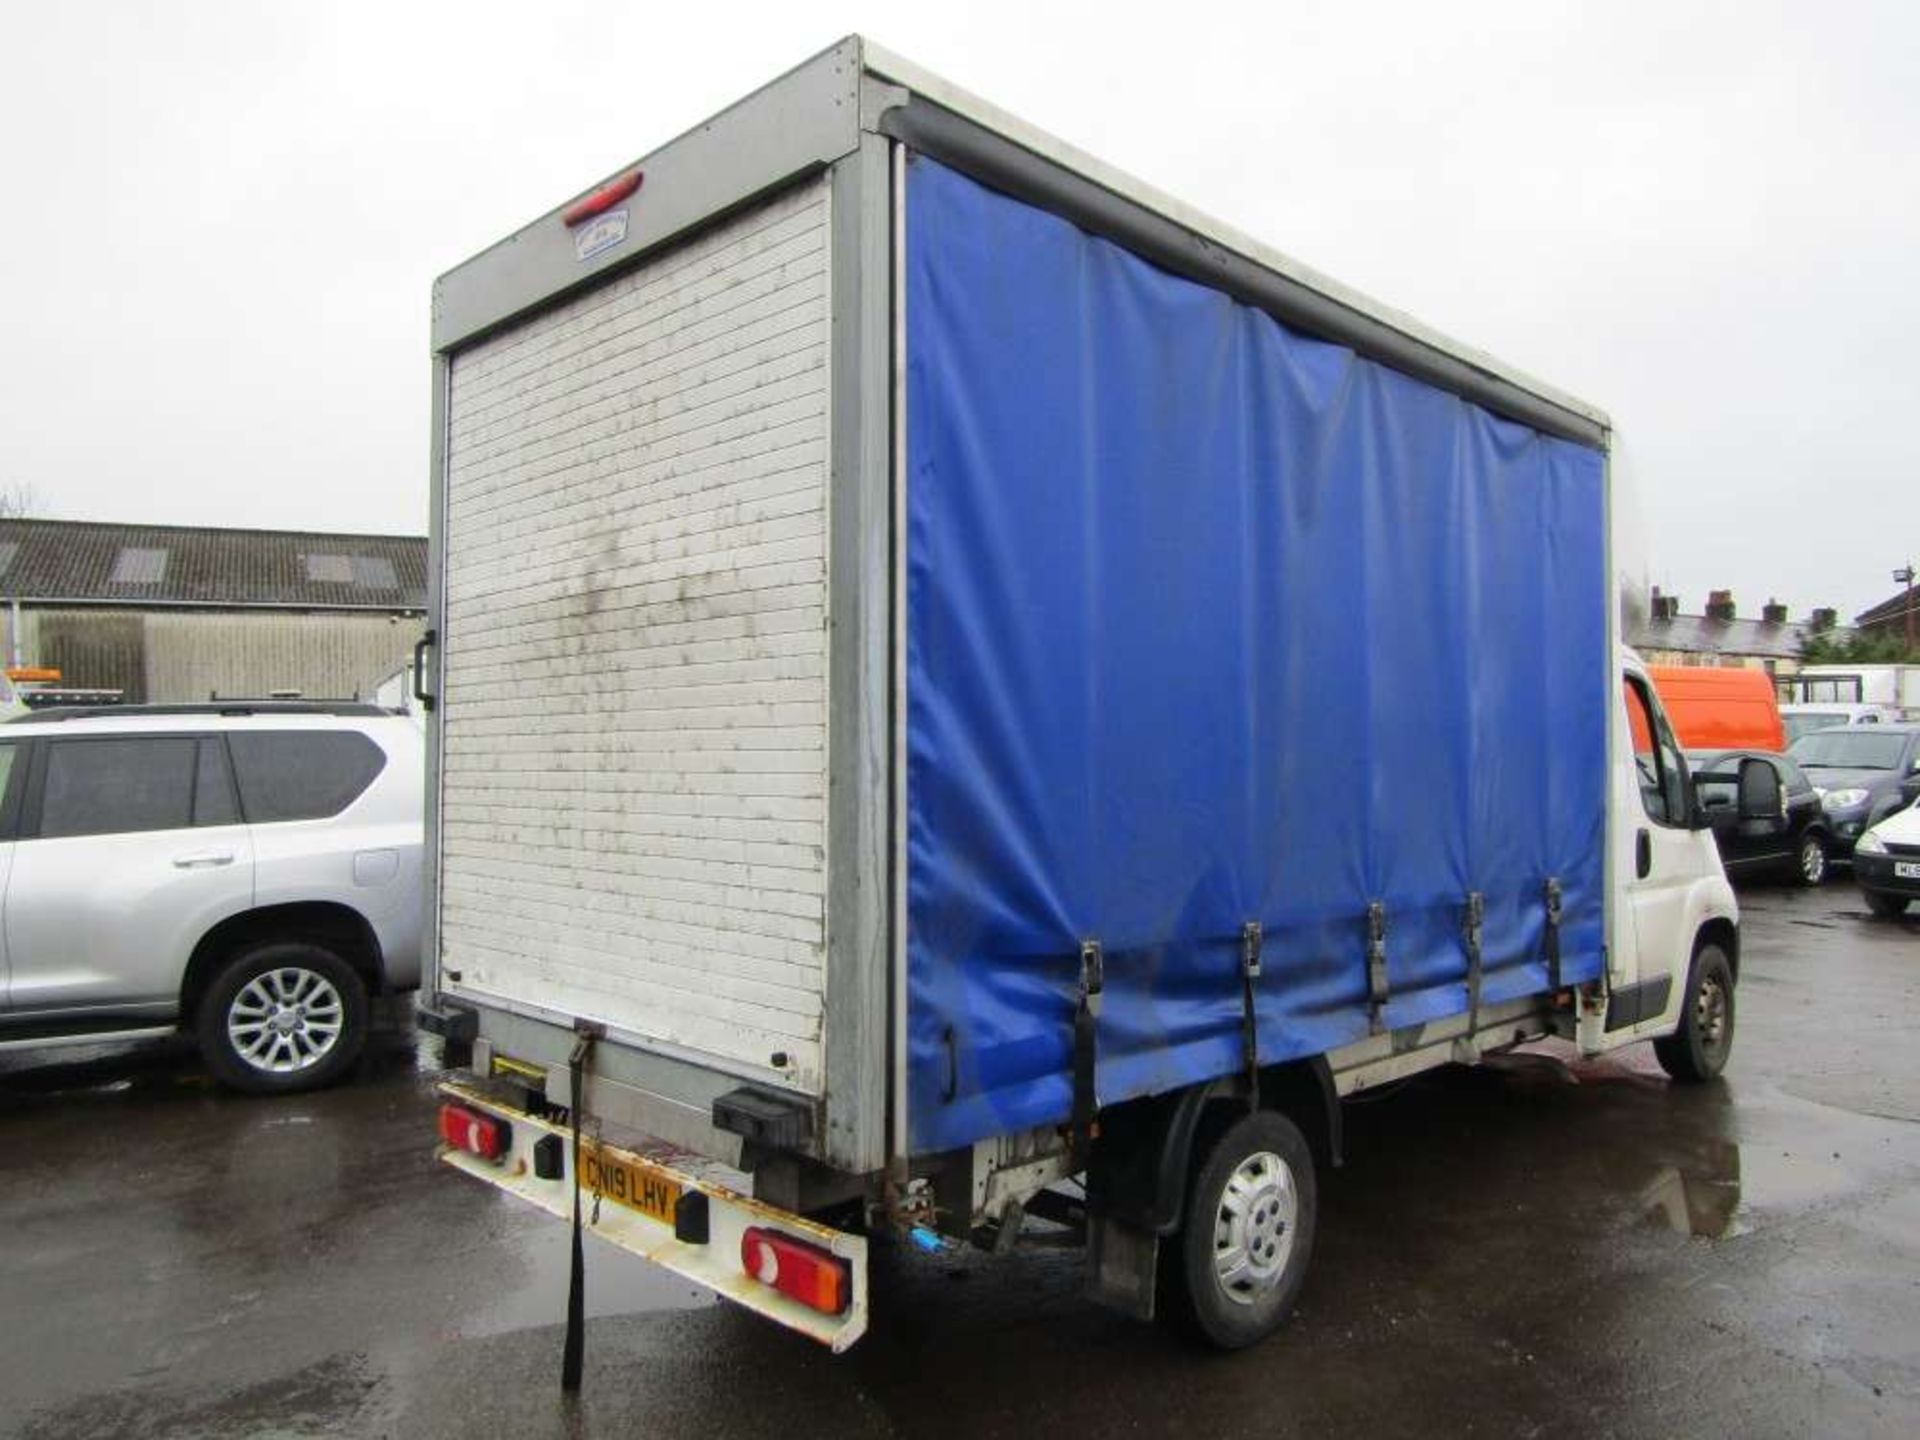 2019 19 reg Peugeot Boxer 335 L3 Blue HDI Curtain Sider - Image 4 of 7